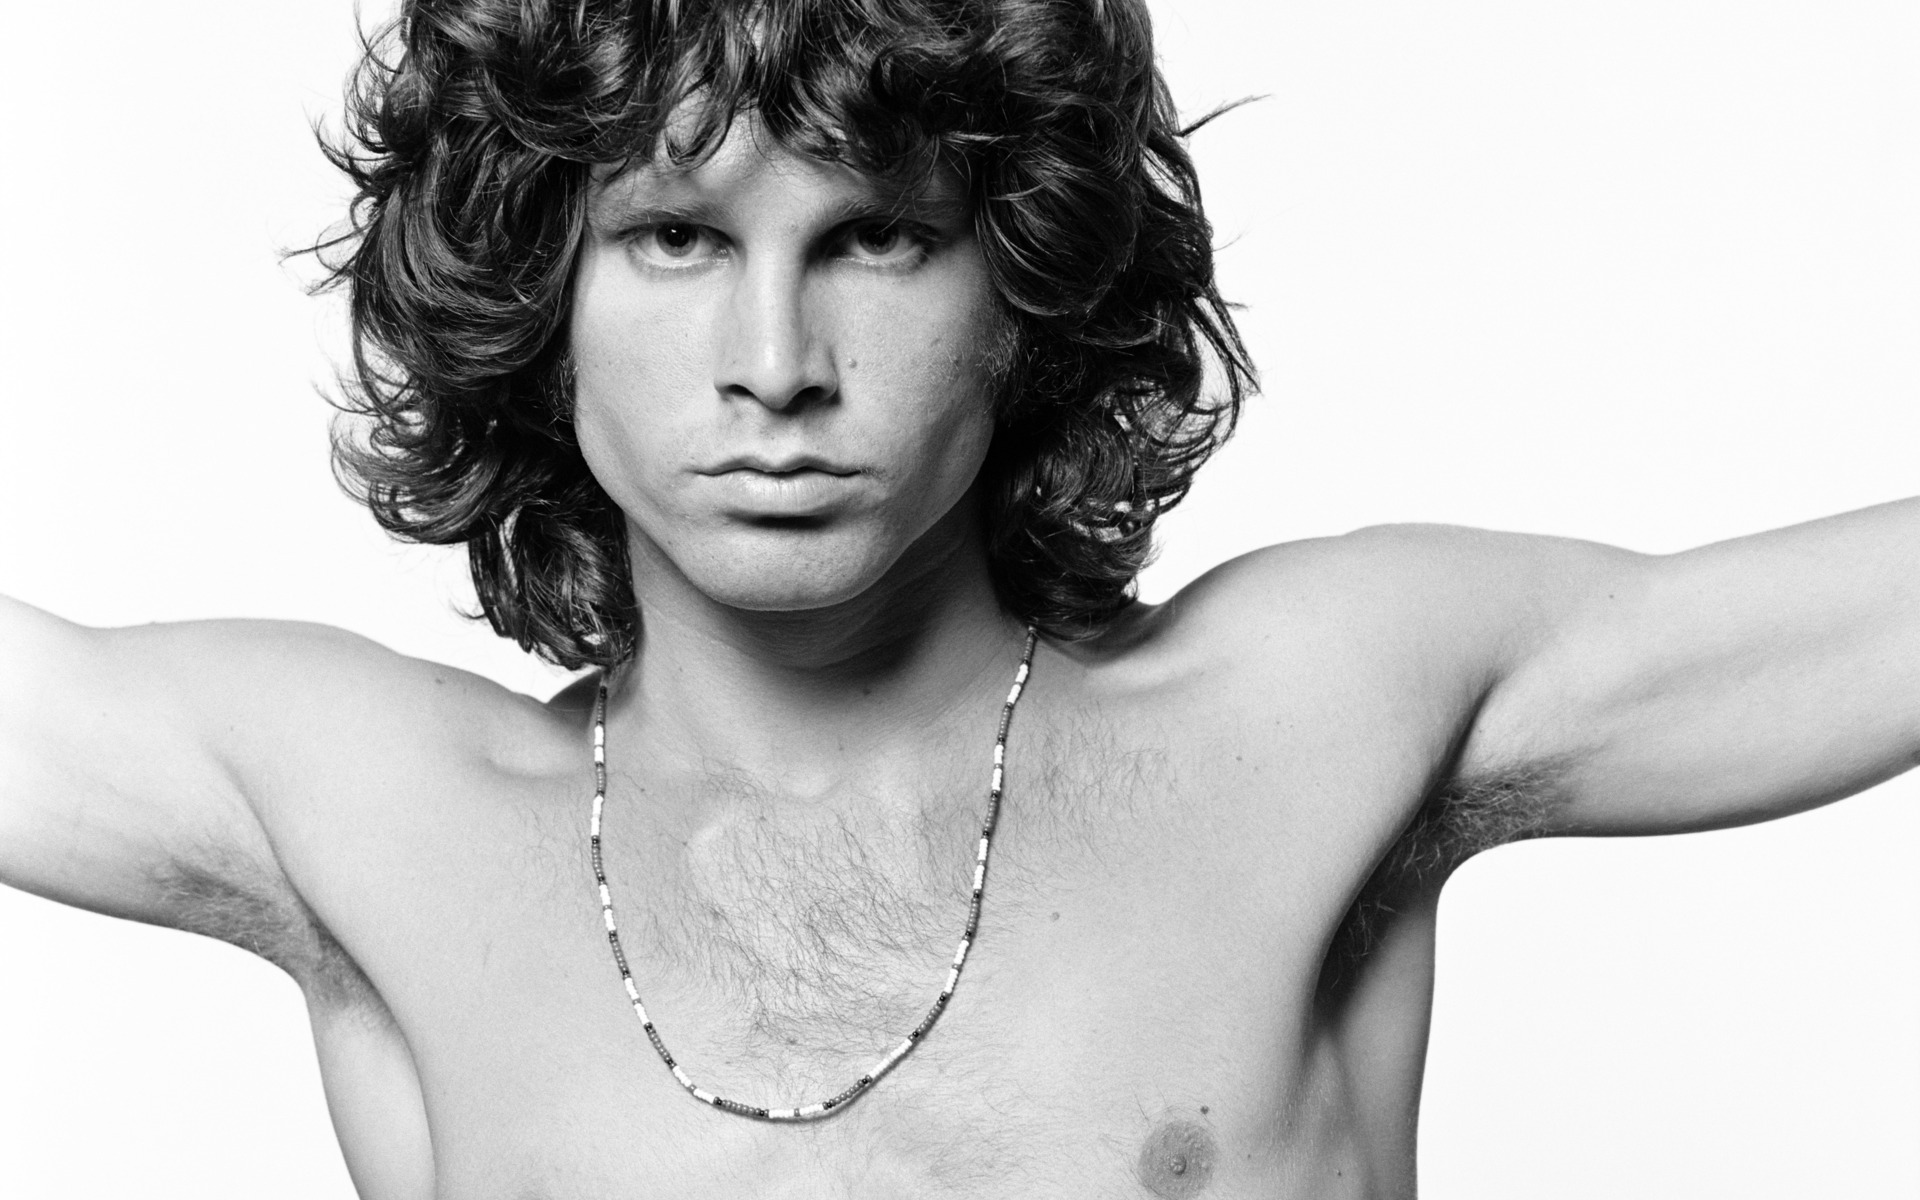 Was it not just Jim Morrison's confusion?